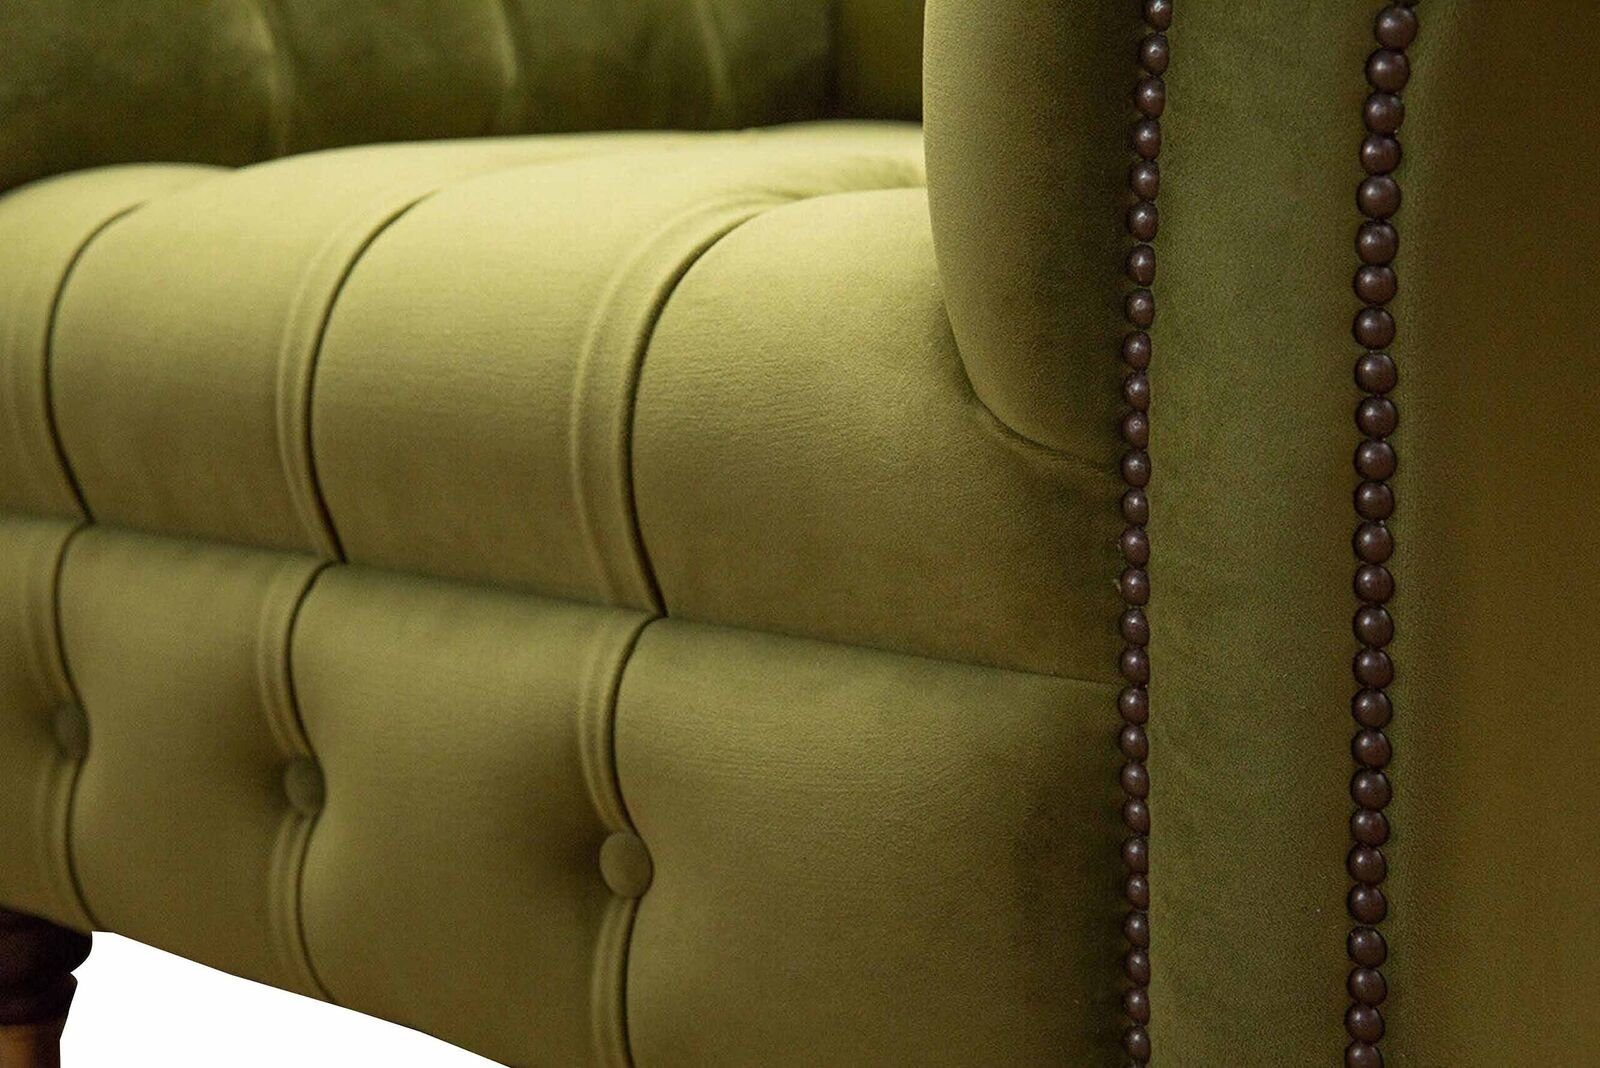 Chesterfield Luxus Couch Made Couchen, Sessel In Design Polster Europe JVmoebel Textil Sessel